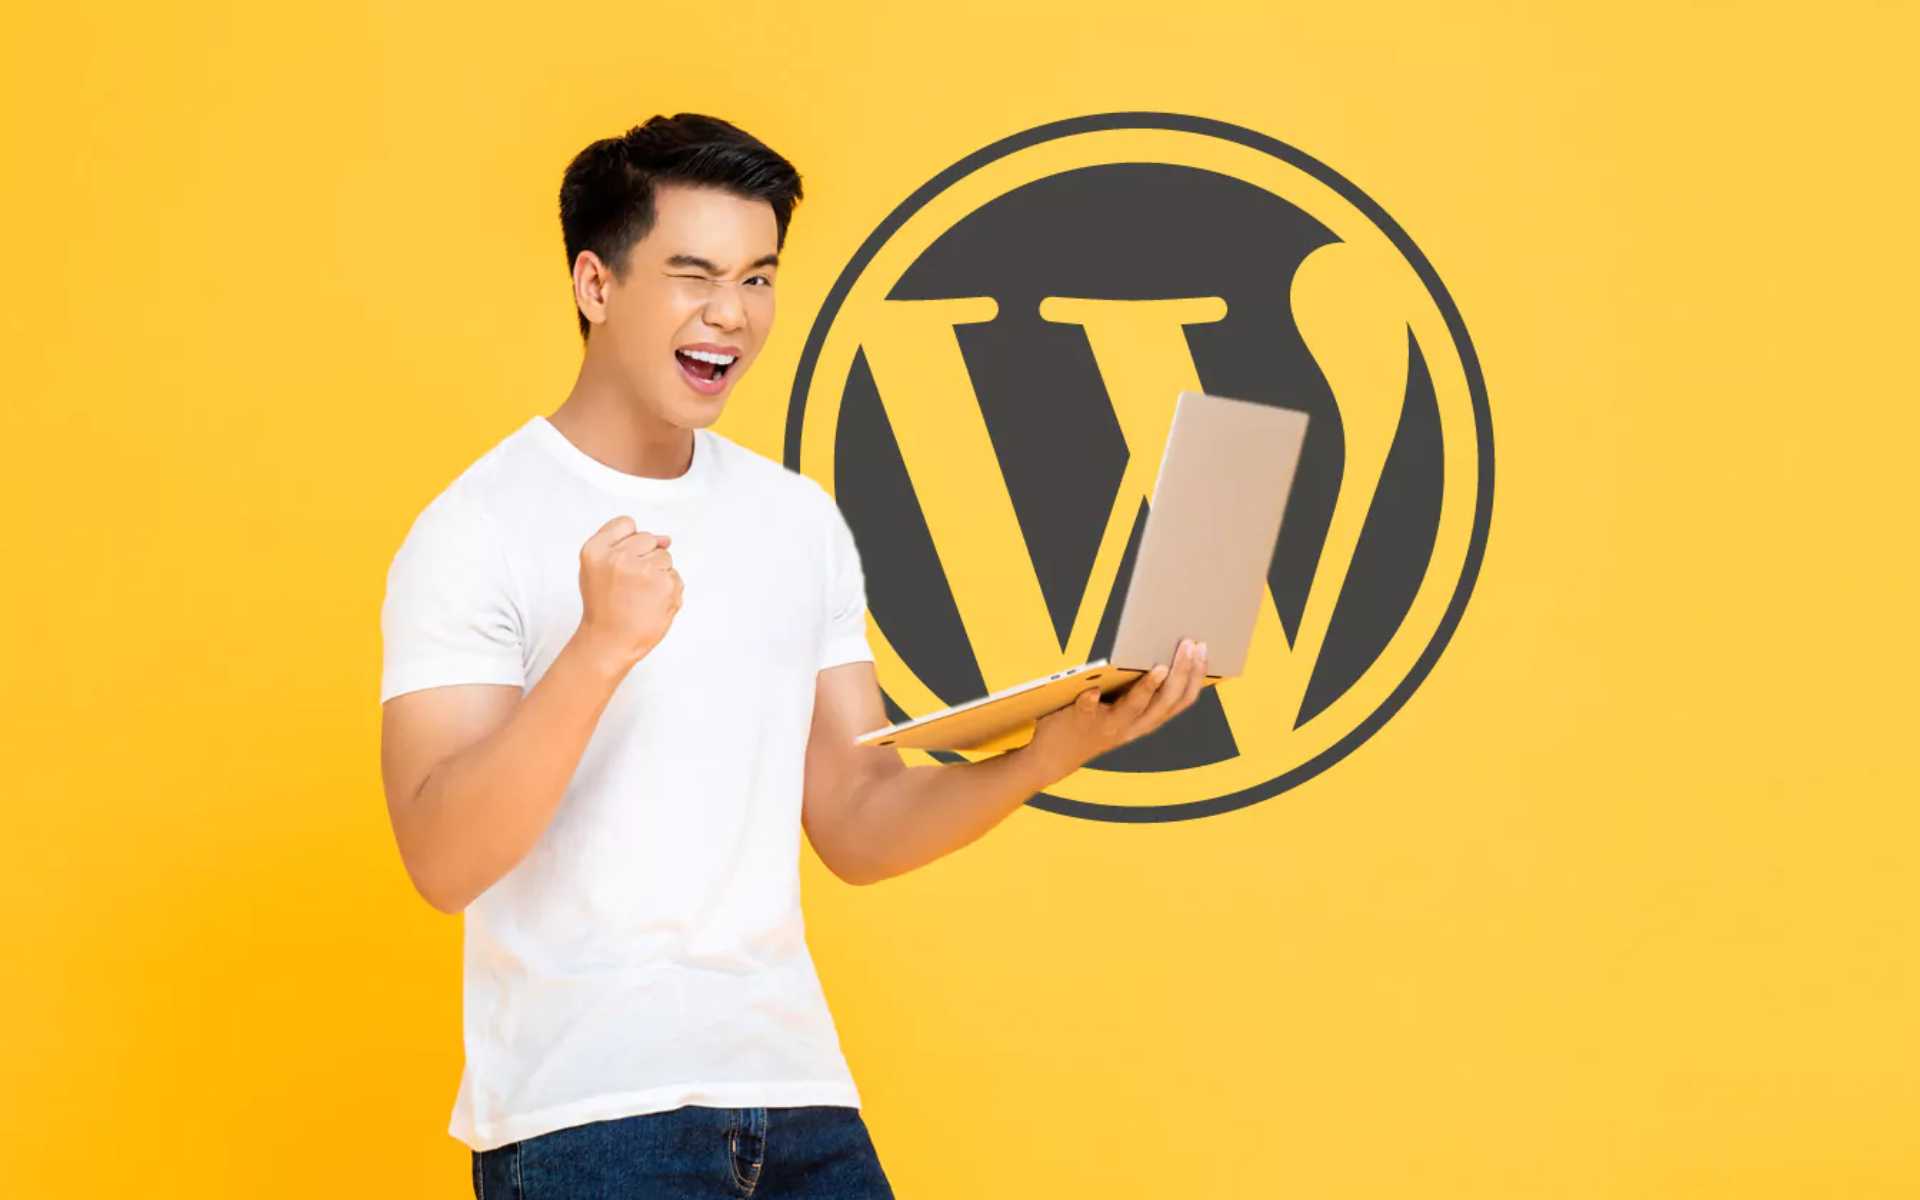 WordPress Releases A Performance Plugin For “Near-Instant Load Times”